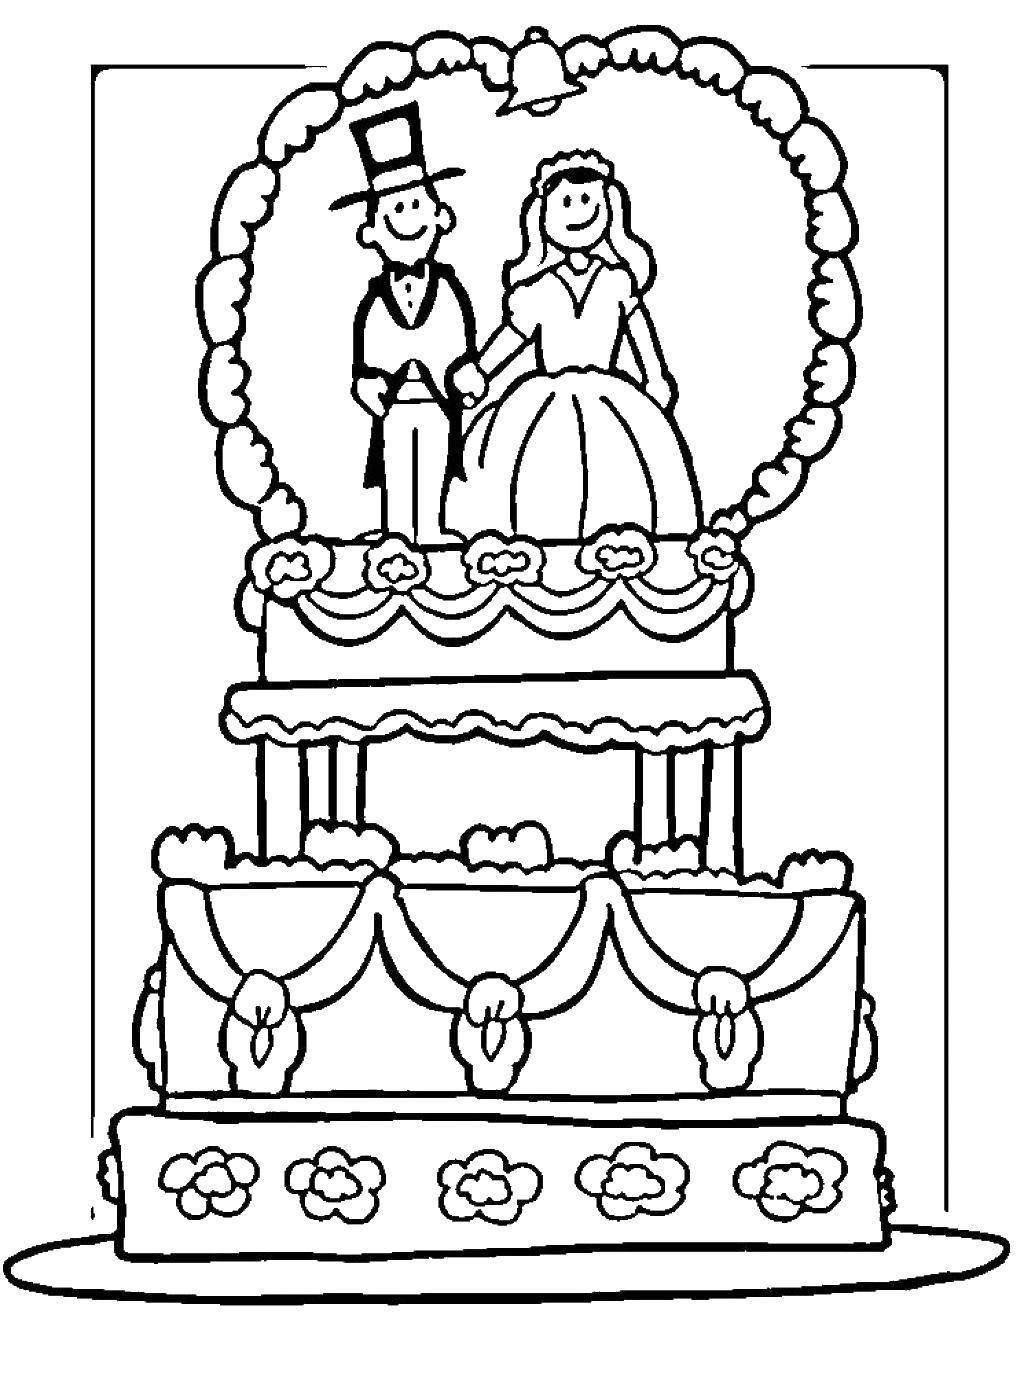 Coloring The cake on the wedding day. Category Wedding. Tags:  wedding, dress, cake.